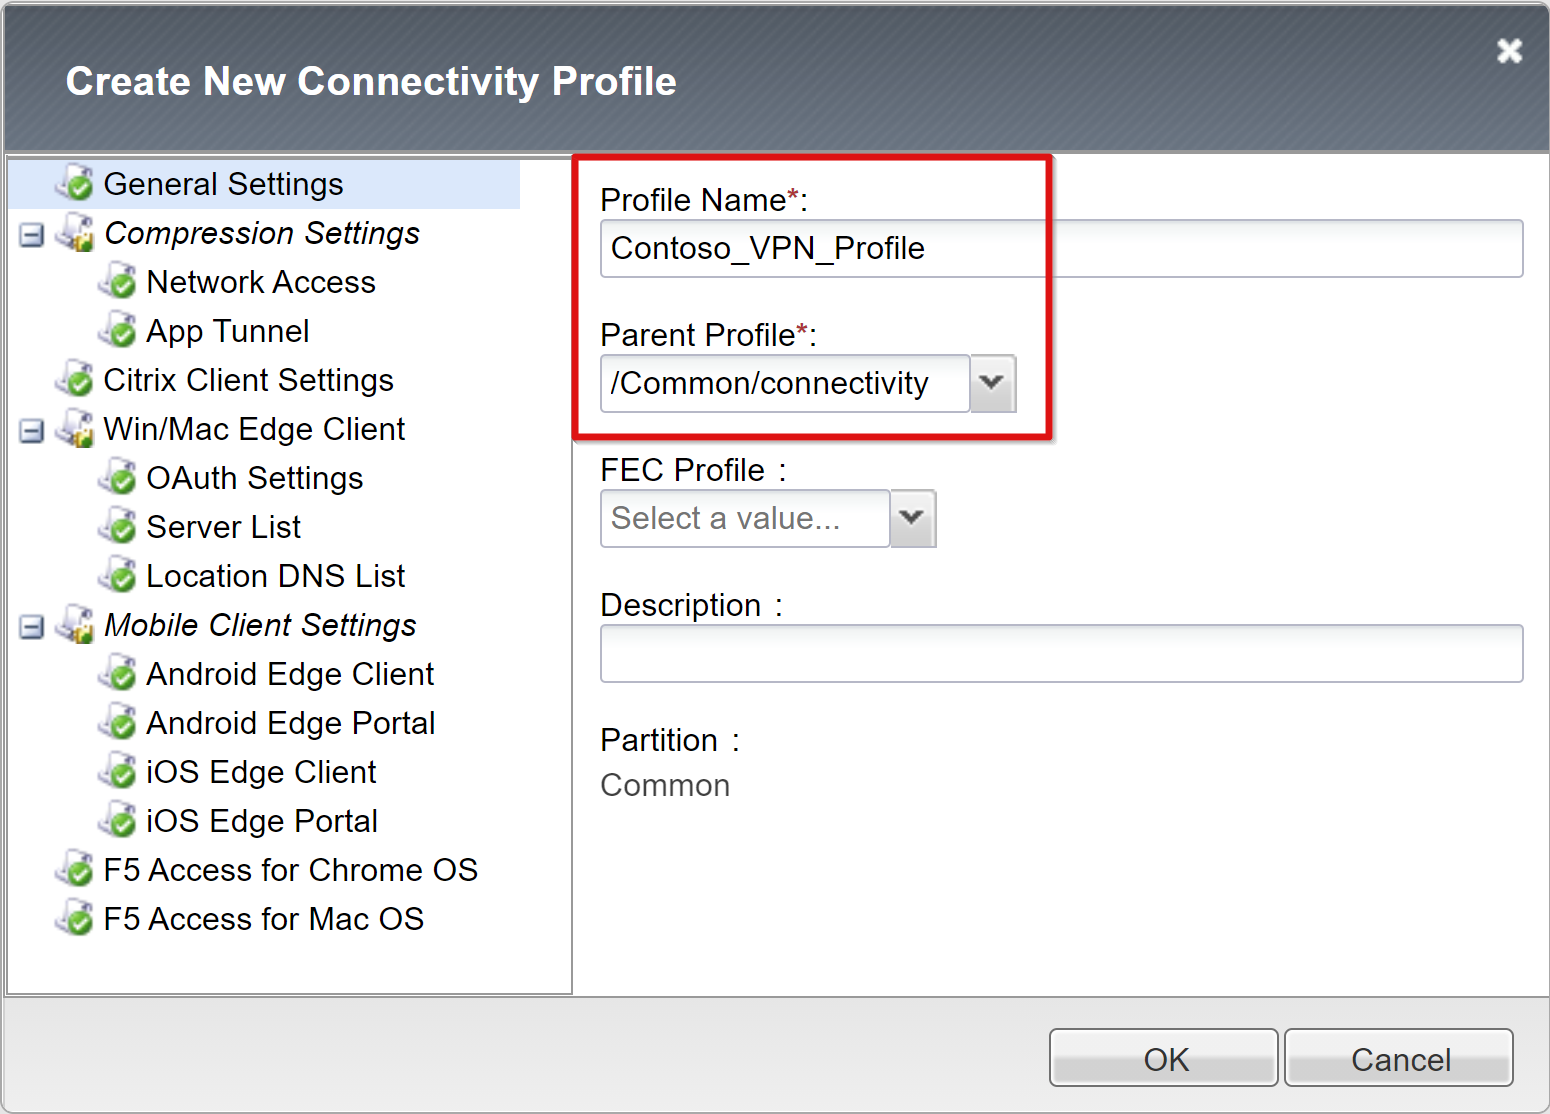 Image shows create new connectivity profile